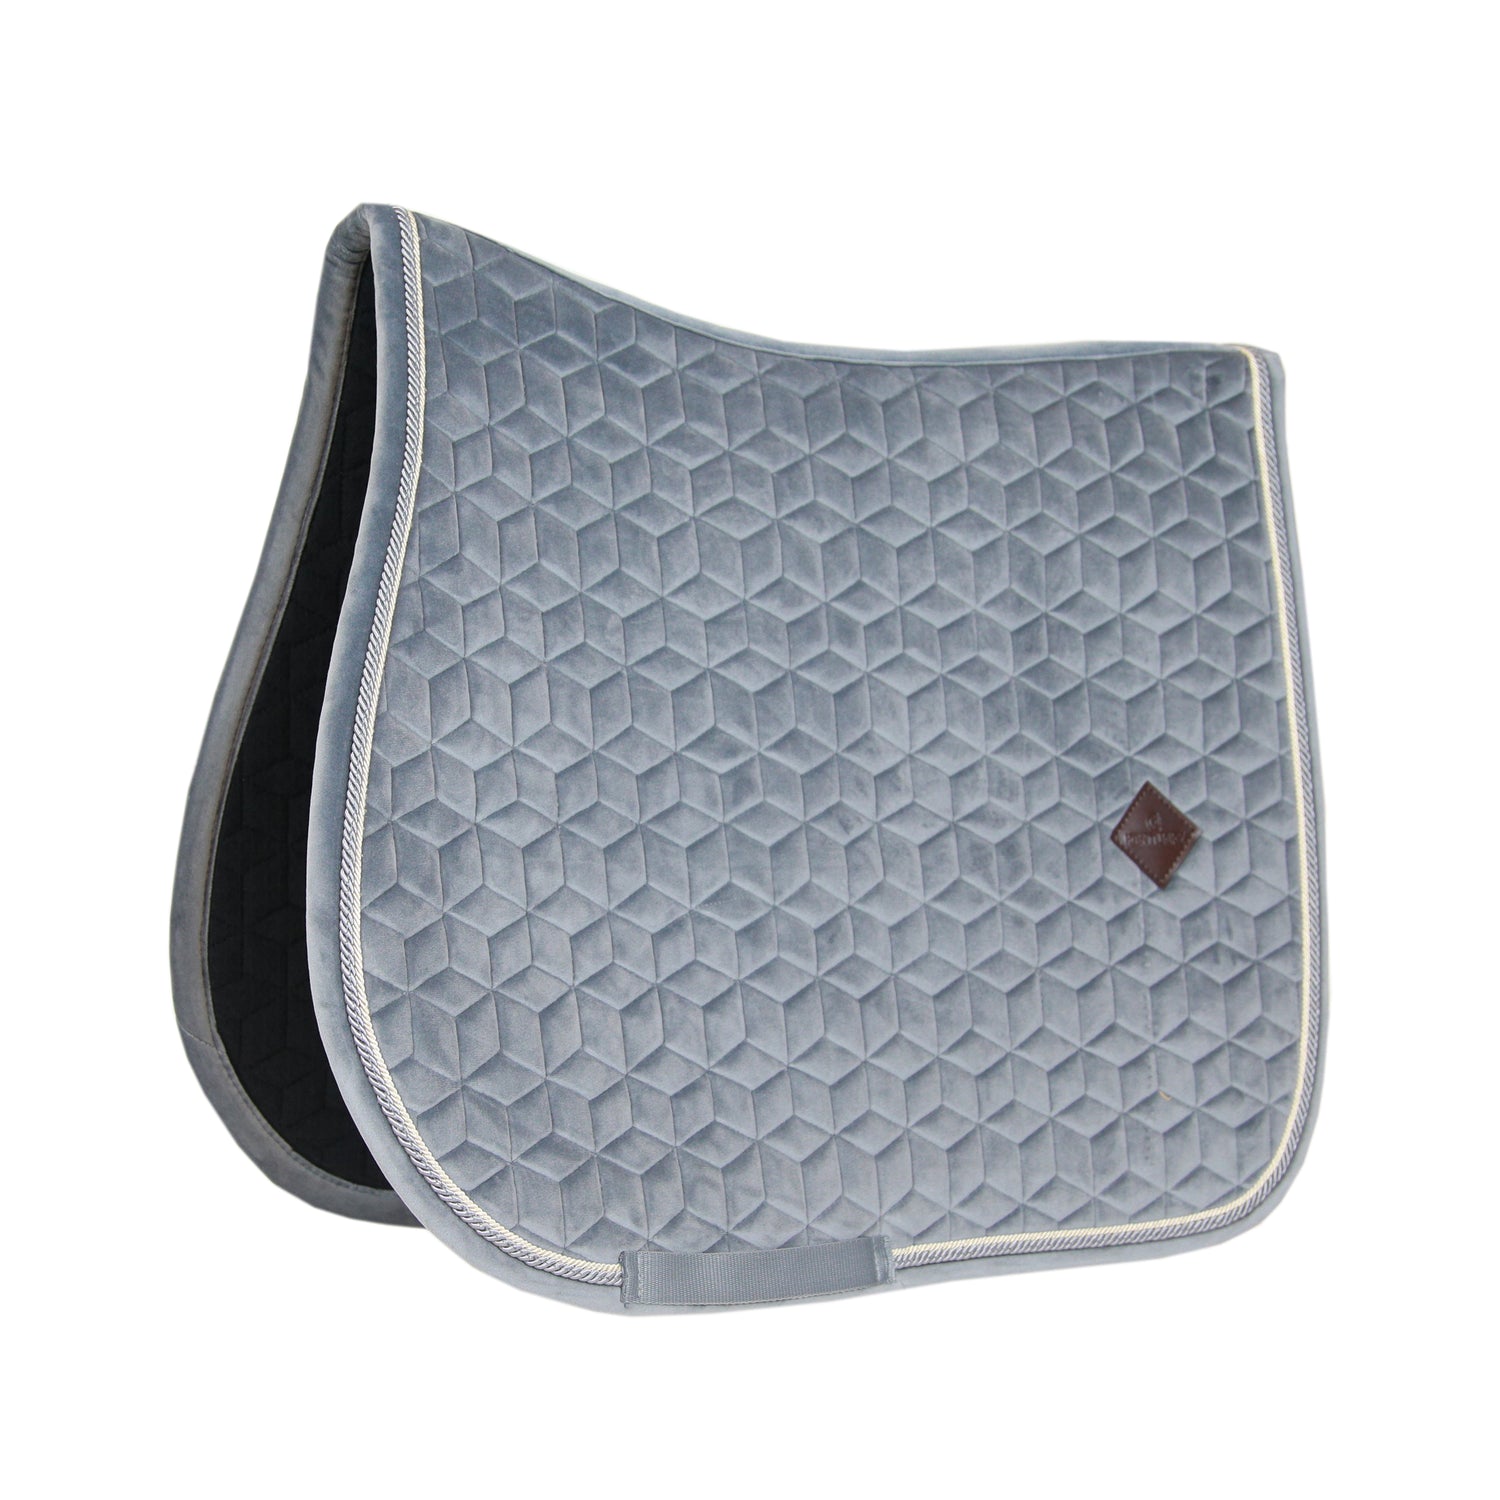 The Saddle Pad Basic Velvet is shaped for jumping and provides excellent cushioning between the horse’s back and the saddle while protecting against friction. It is stylish And classy, with a double twisted piping. This pad has no annoying straps to attach to the saddle, only a nylon strap for the girth. The subtle artificial leather logo is placed in a central,